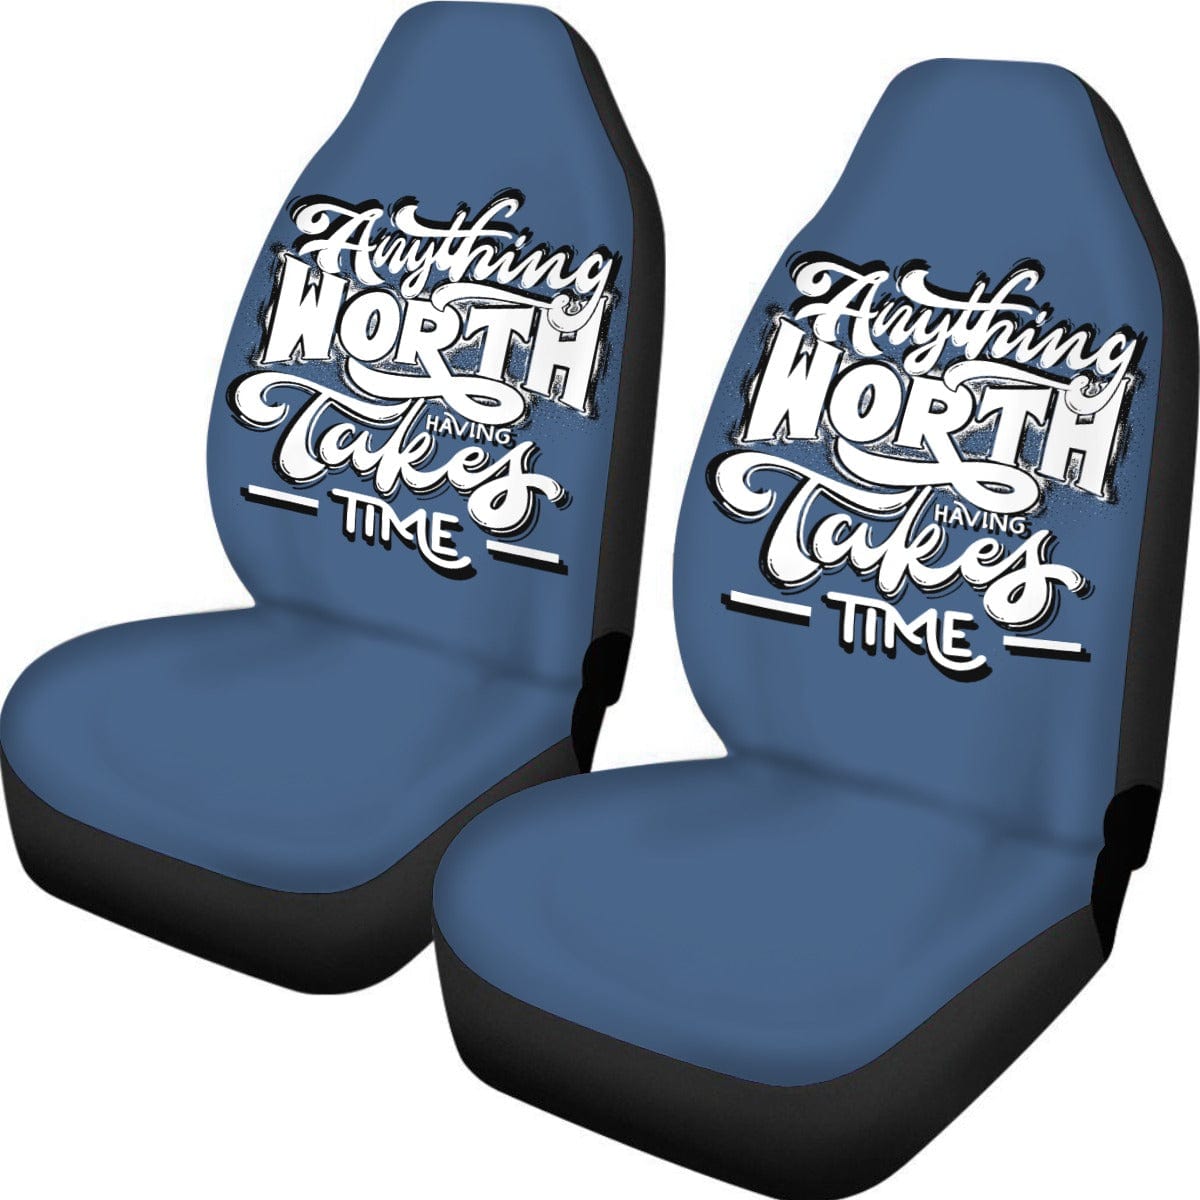 Yoycol U / White Denim Blue Anything Worth Having - Universal Car Seat Cover With Thickened Back